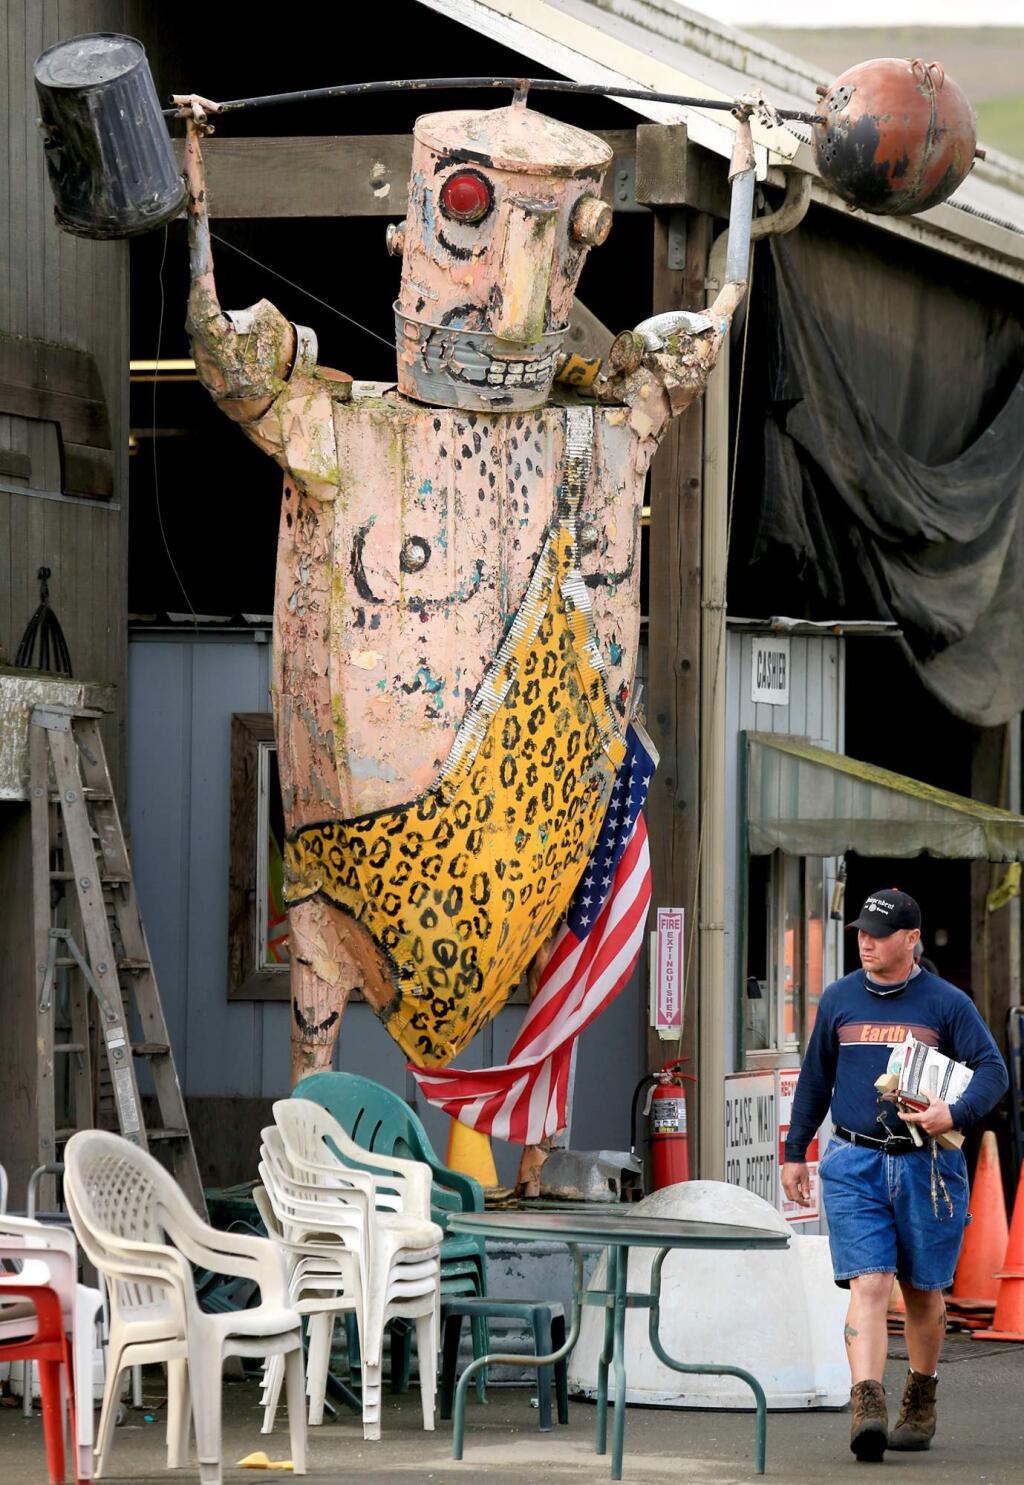 At Recycletown at the Central Landfill off Mecham Road west of Cotati, Monday Dec. 28, 2015, a statue, created from recycled material by Patrick Amiot, is an iconic part of the drop-off site. (Kent Porter / Press Democrat) 2015